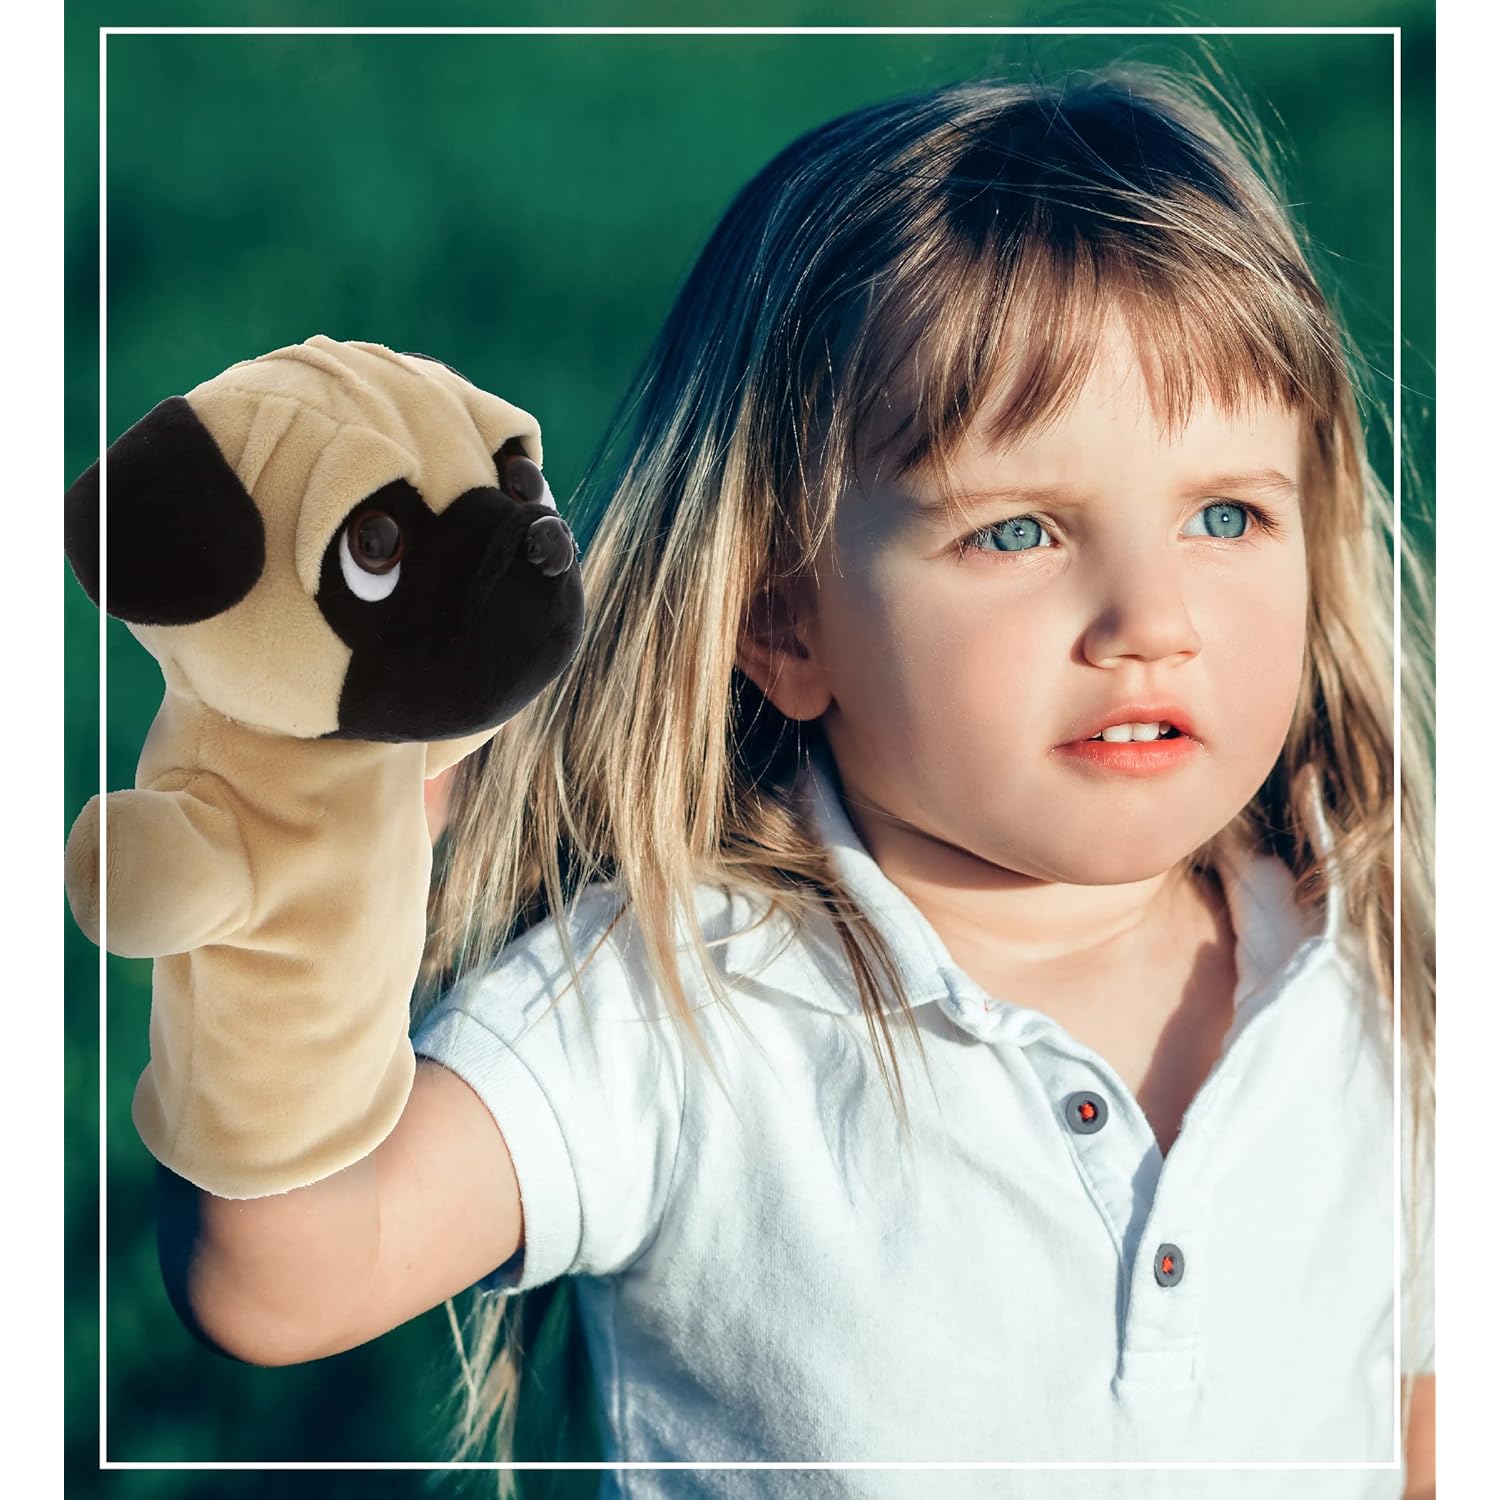 Great Choice Products Pug Dog Hand Puppet - Super Soft Plush Pug Stuffed Animal Hand Puppets For Kids, Cute Educational Pug Hand Puppets For A…